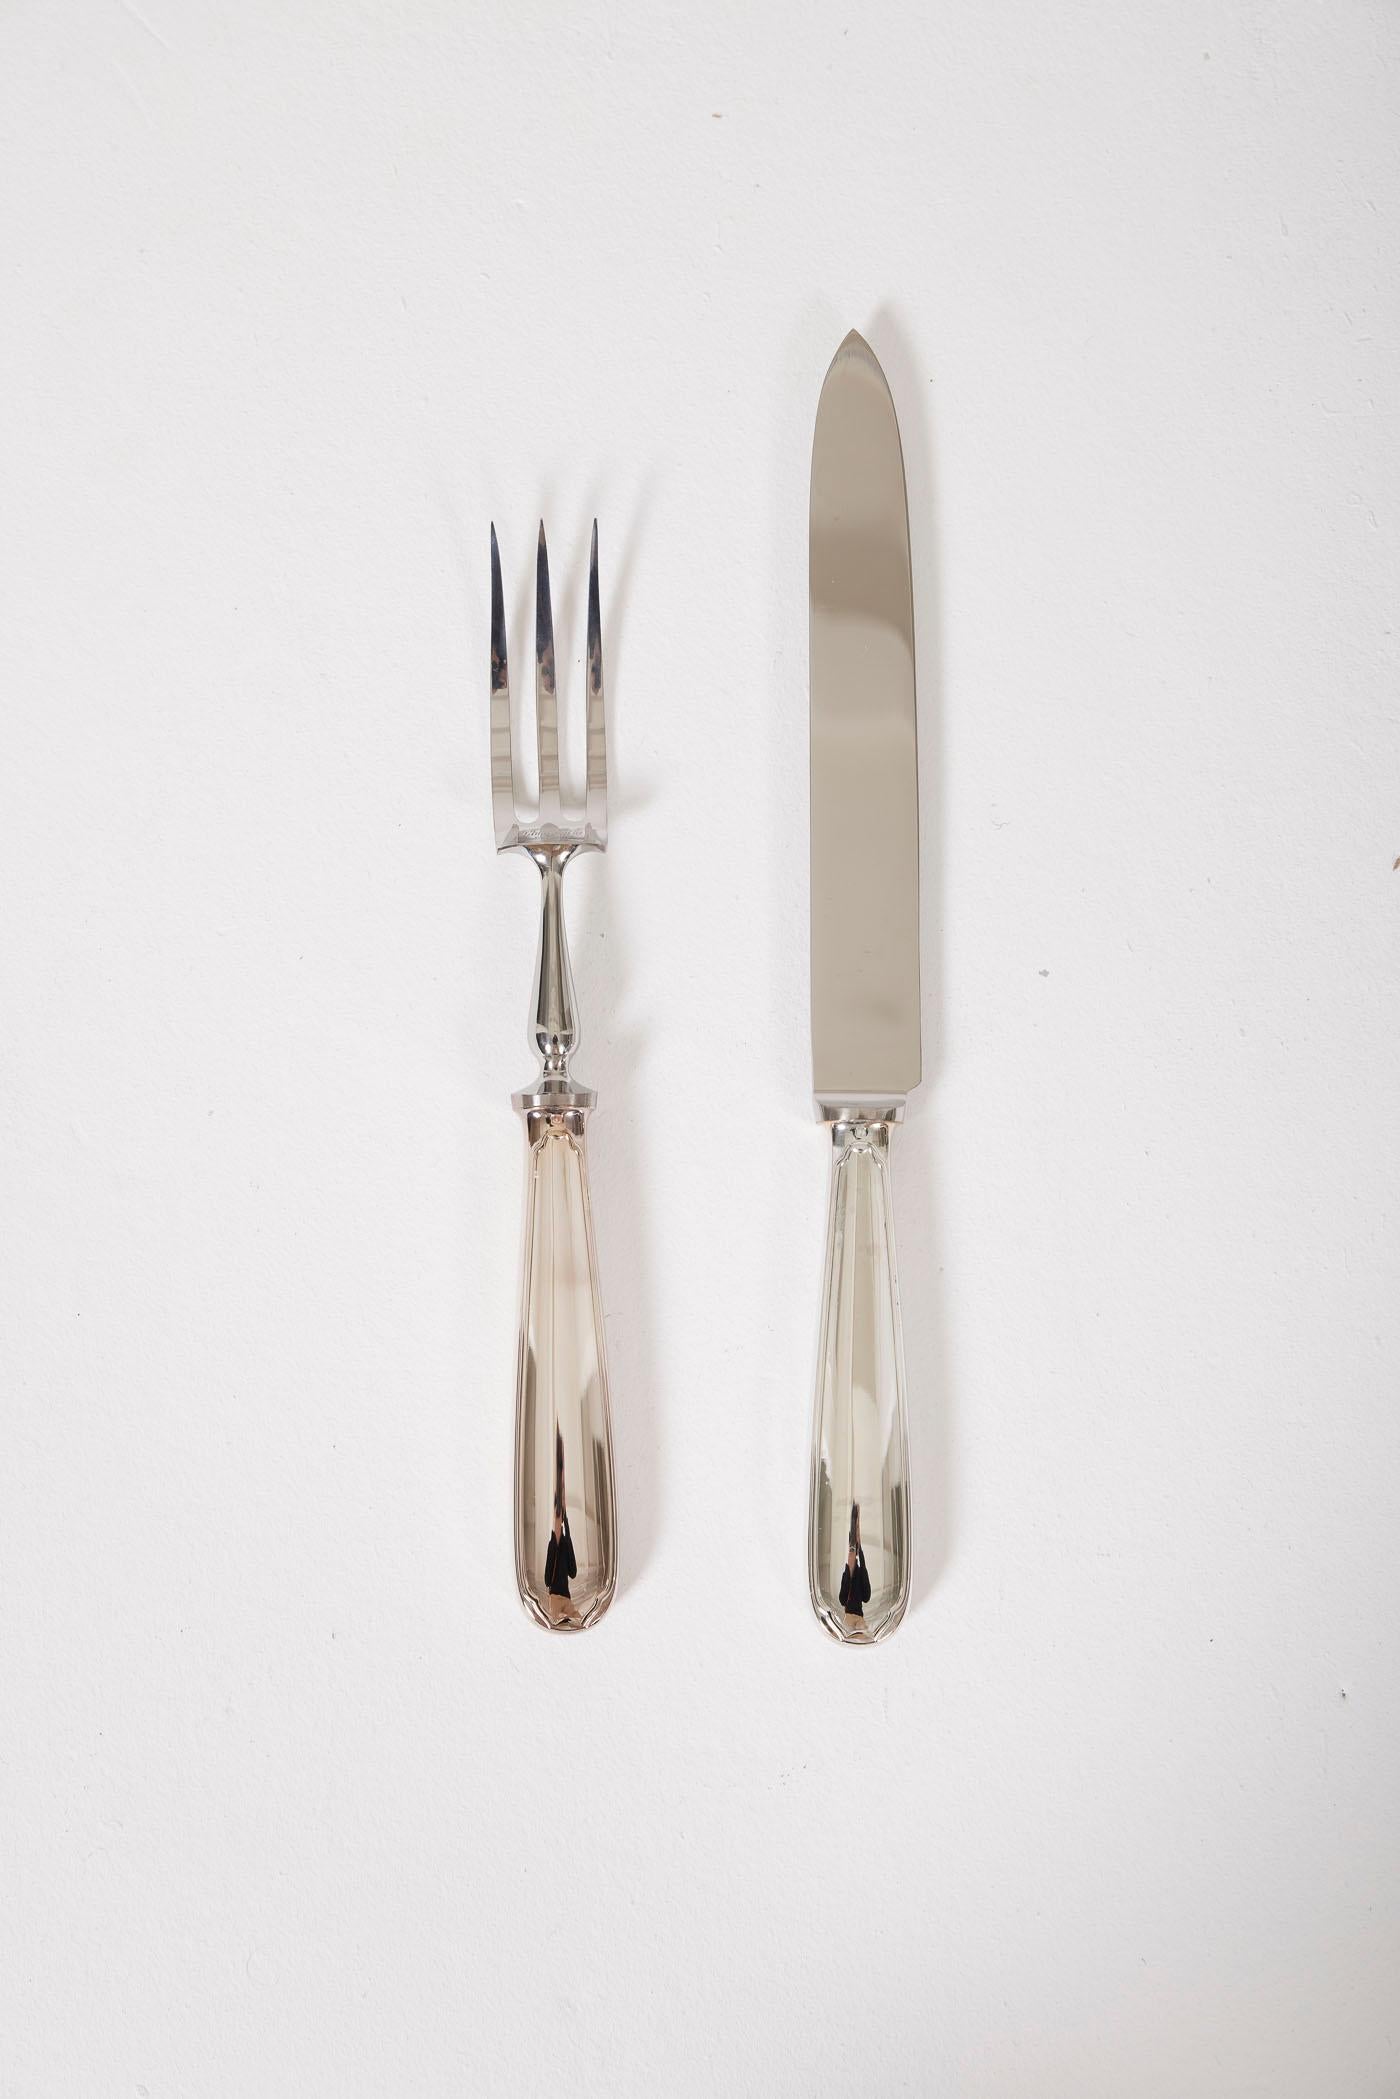 Silver-plated Carving Set comprising a large fork and a large knife from the Christofle house. Clearly engraved and hallmarked. Very good condition.
LP2203